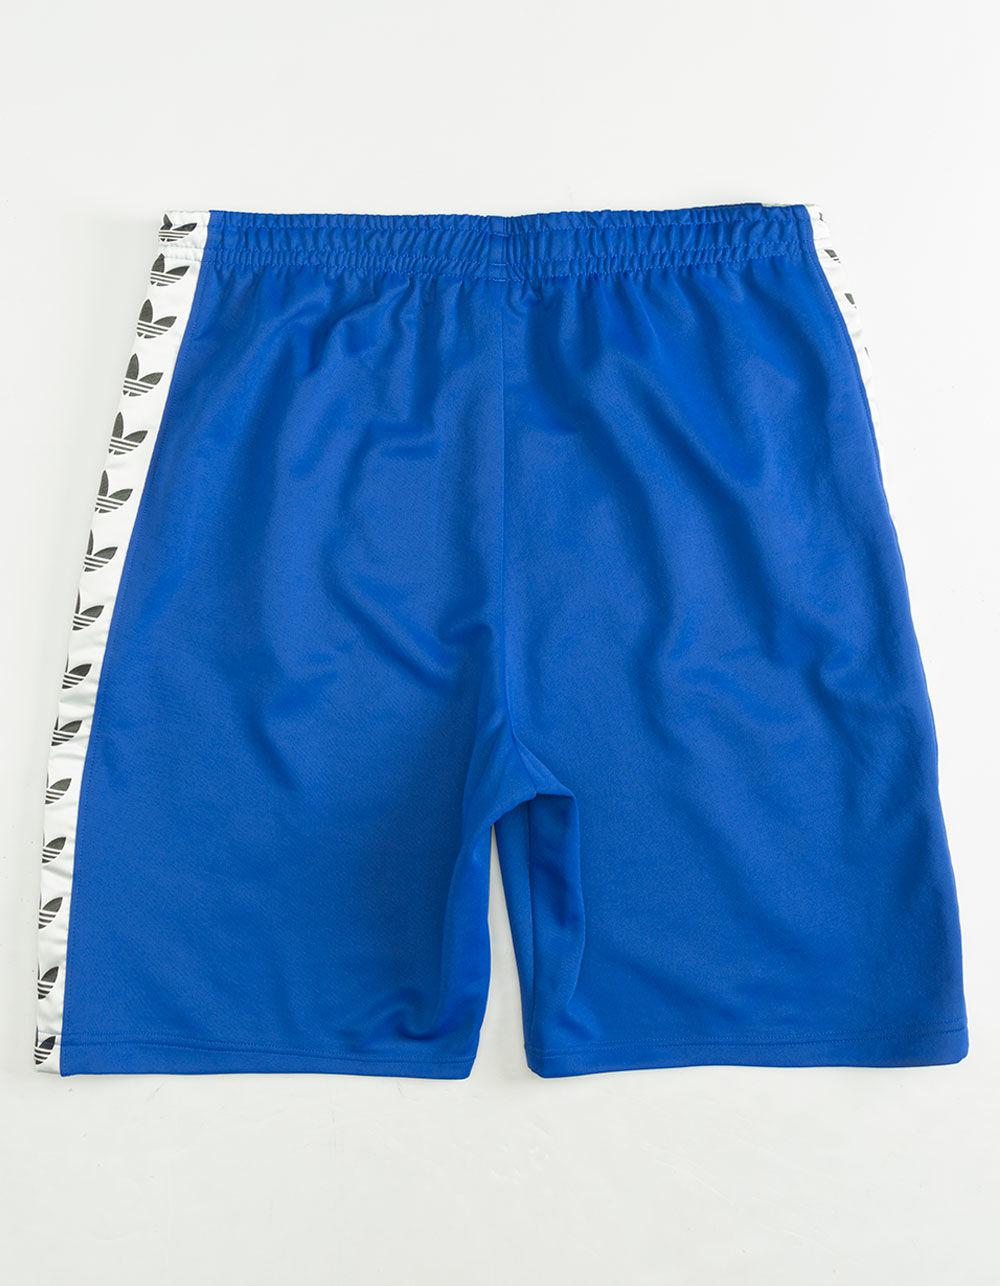 adidas Synthetic Originals Tnt Tape Mens Shorts in Blue for Men - Lyst